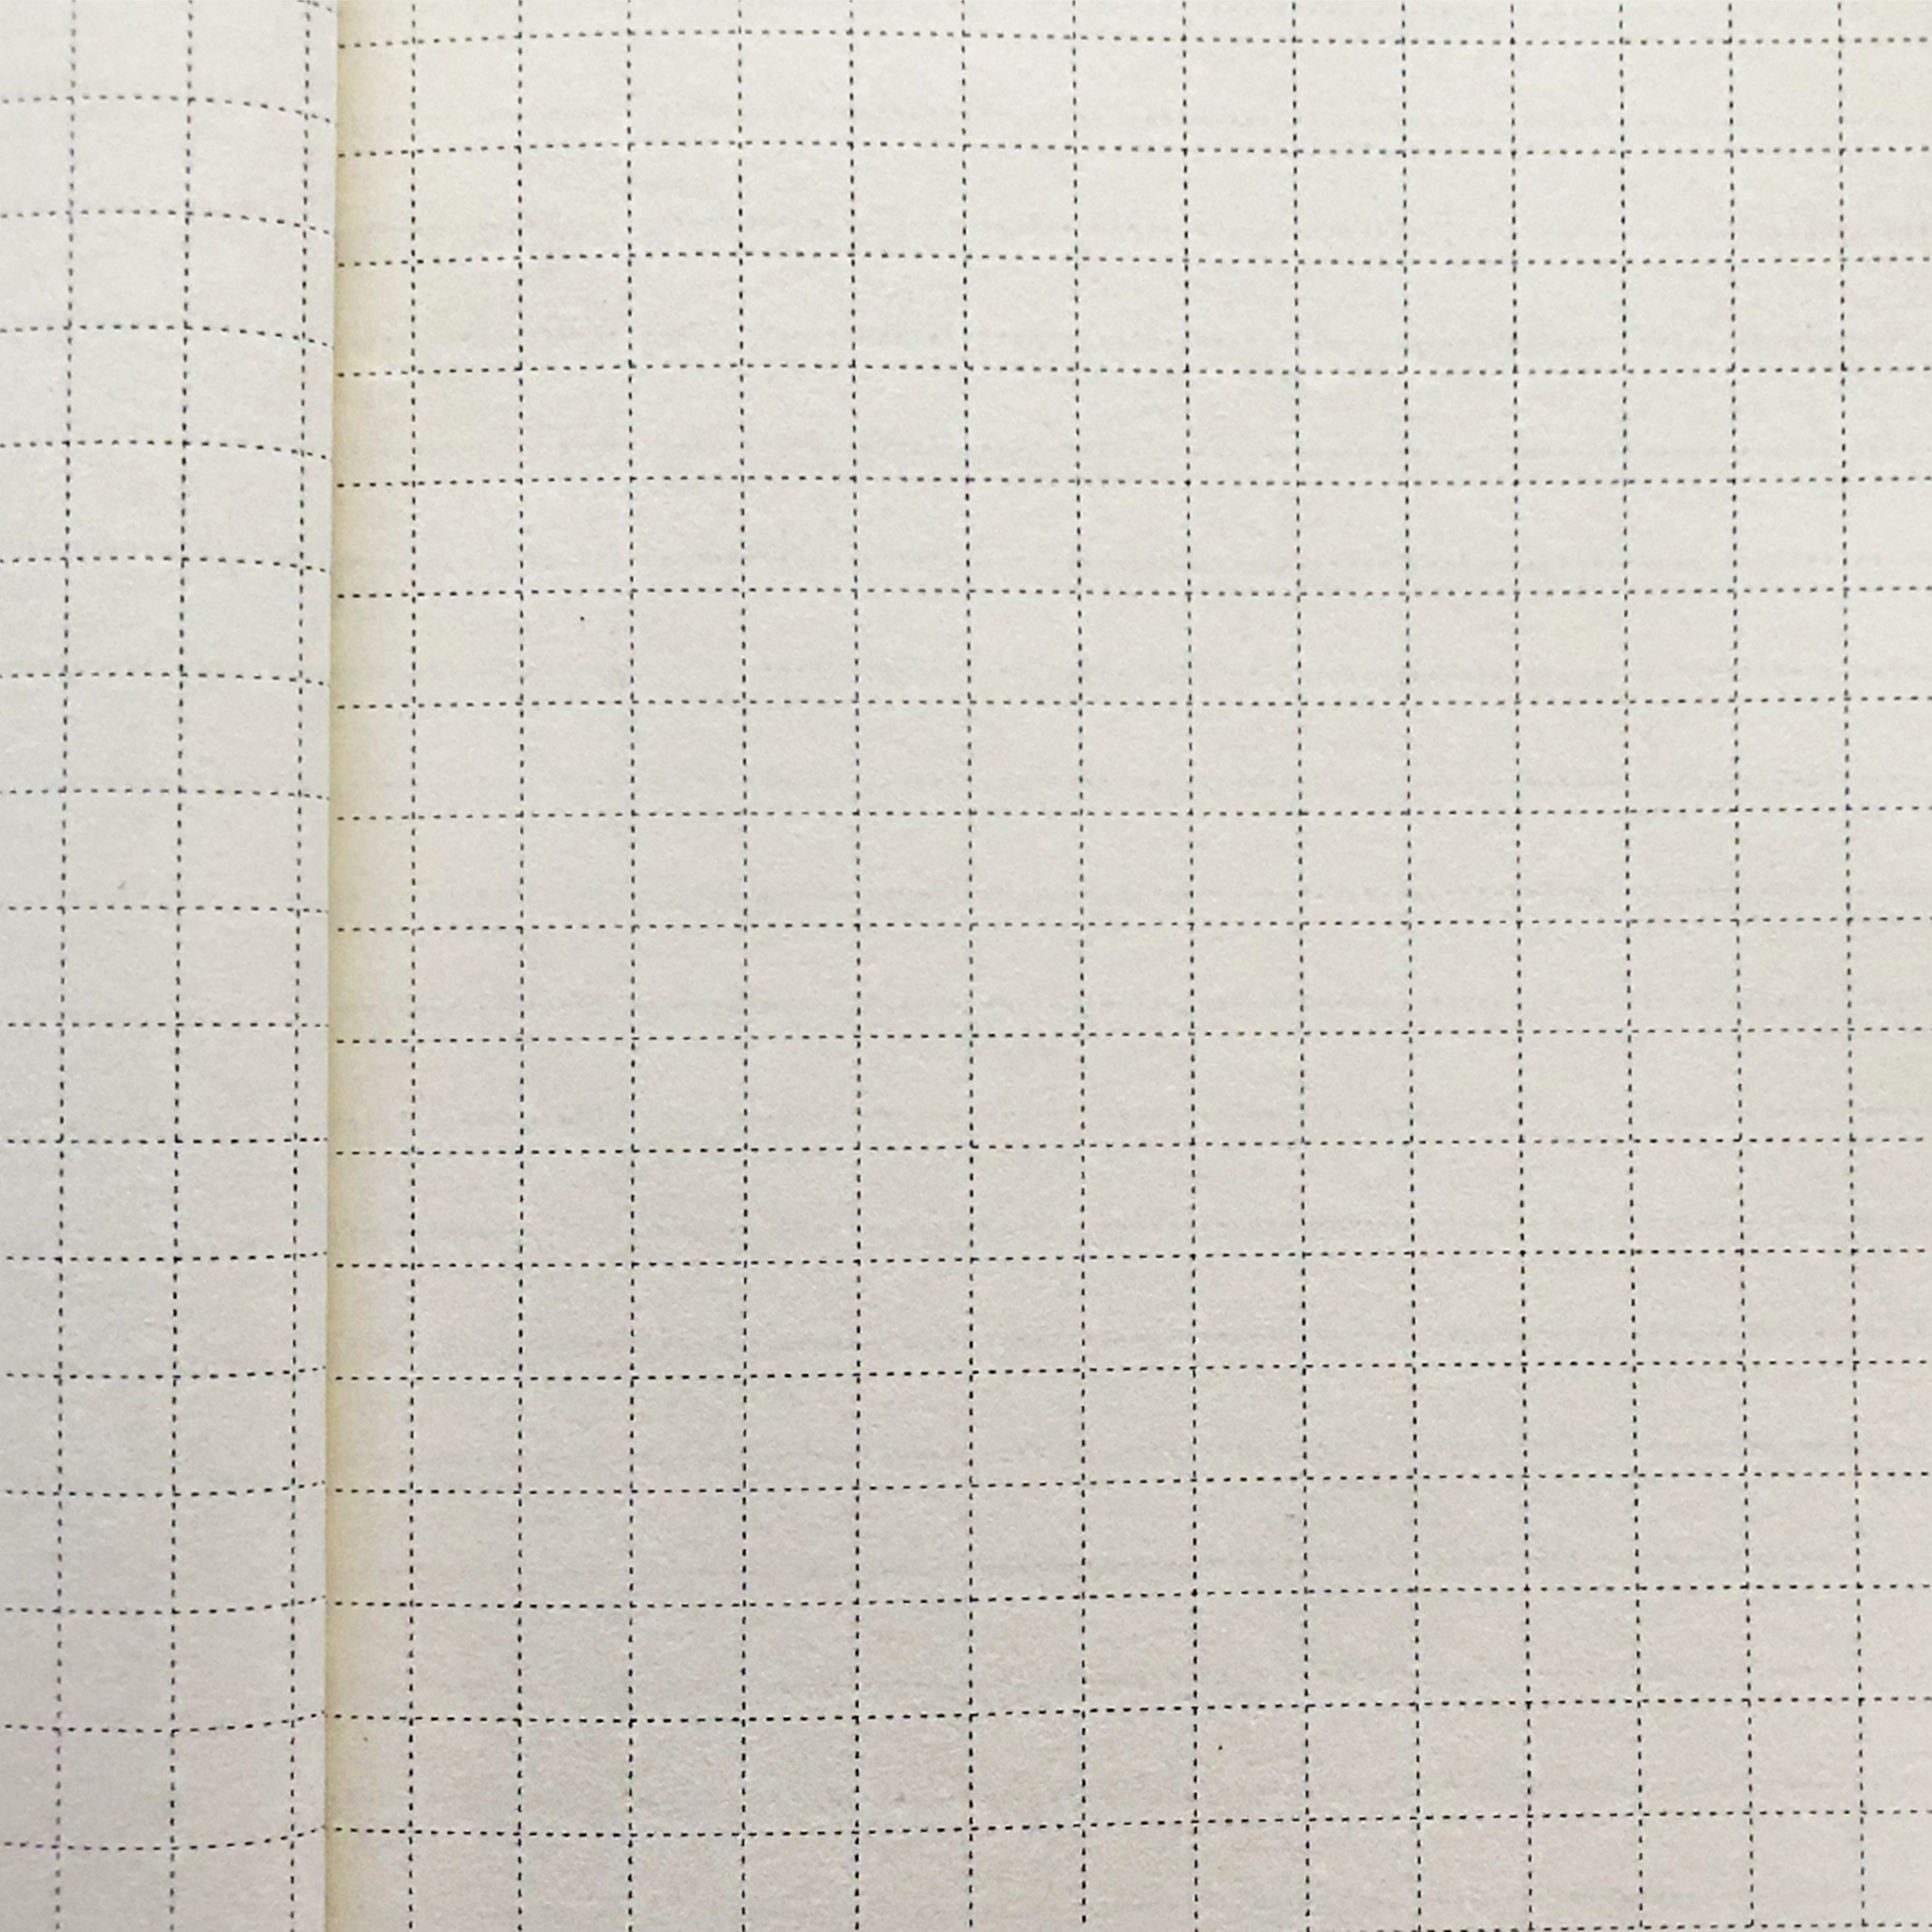 Image shows dot grid pages inside an A5 journal